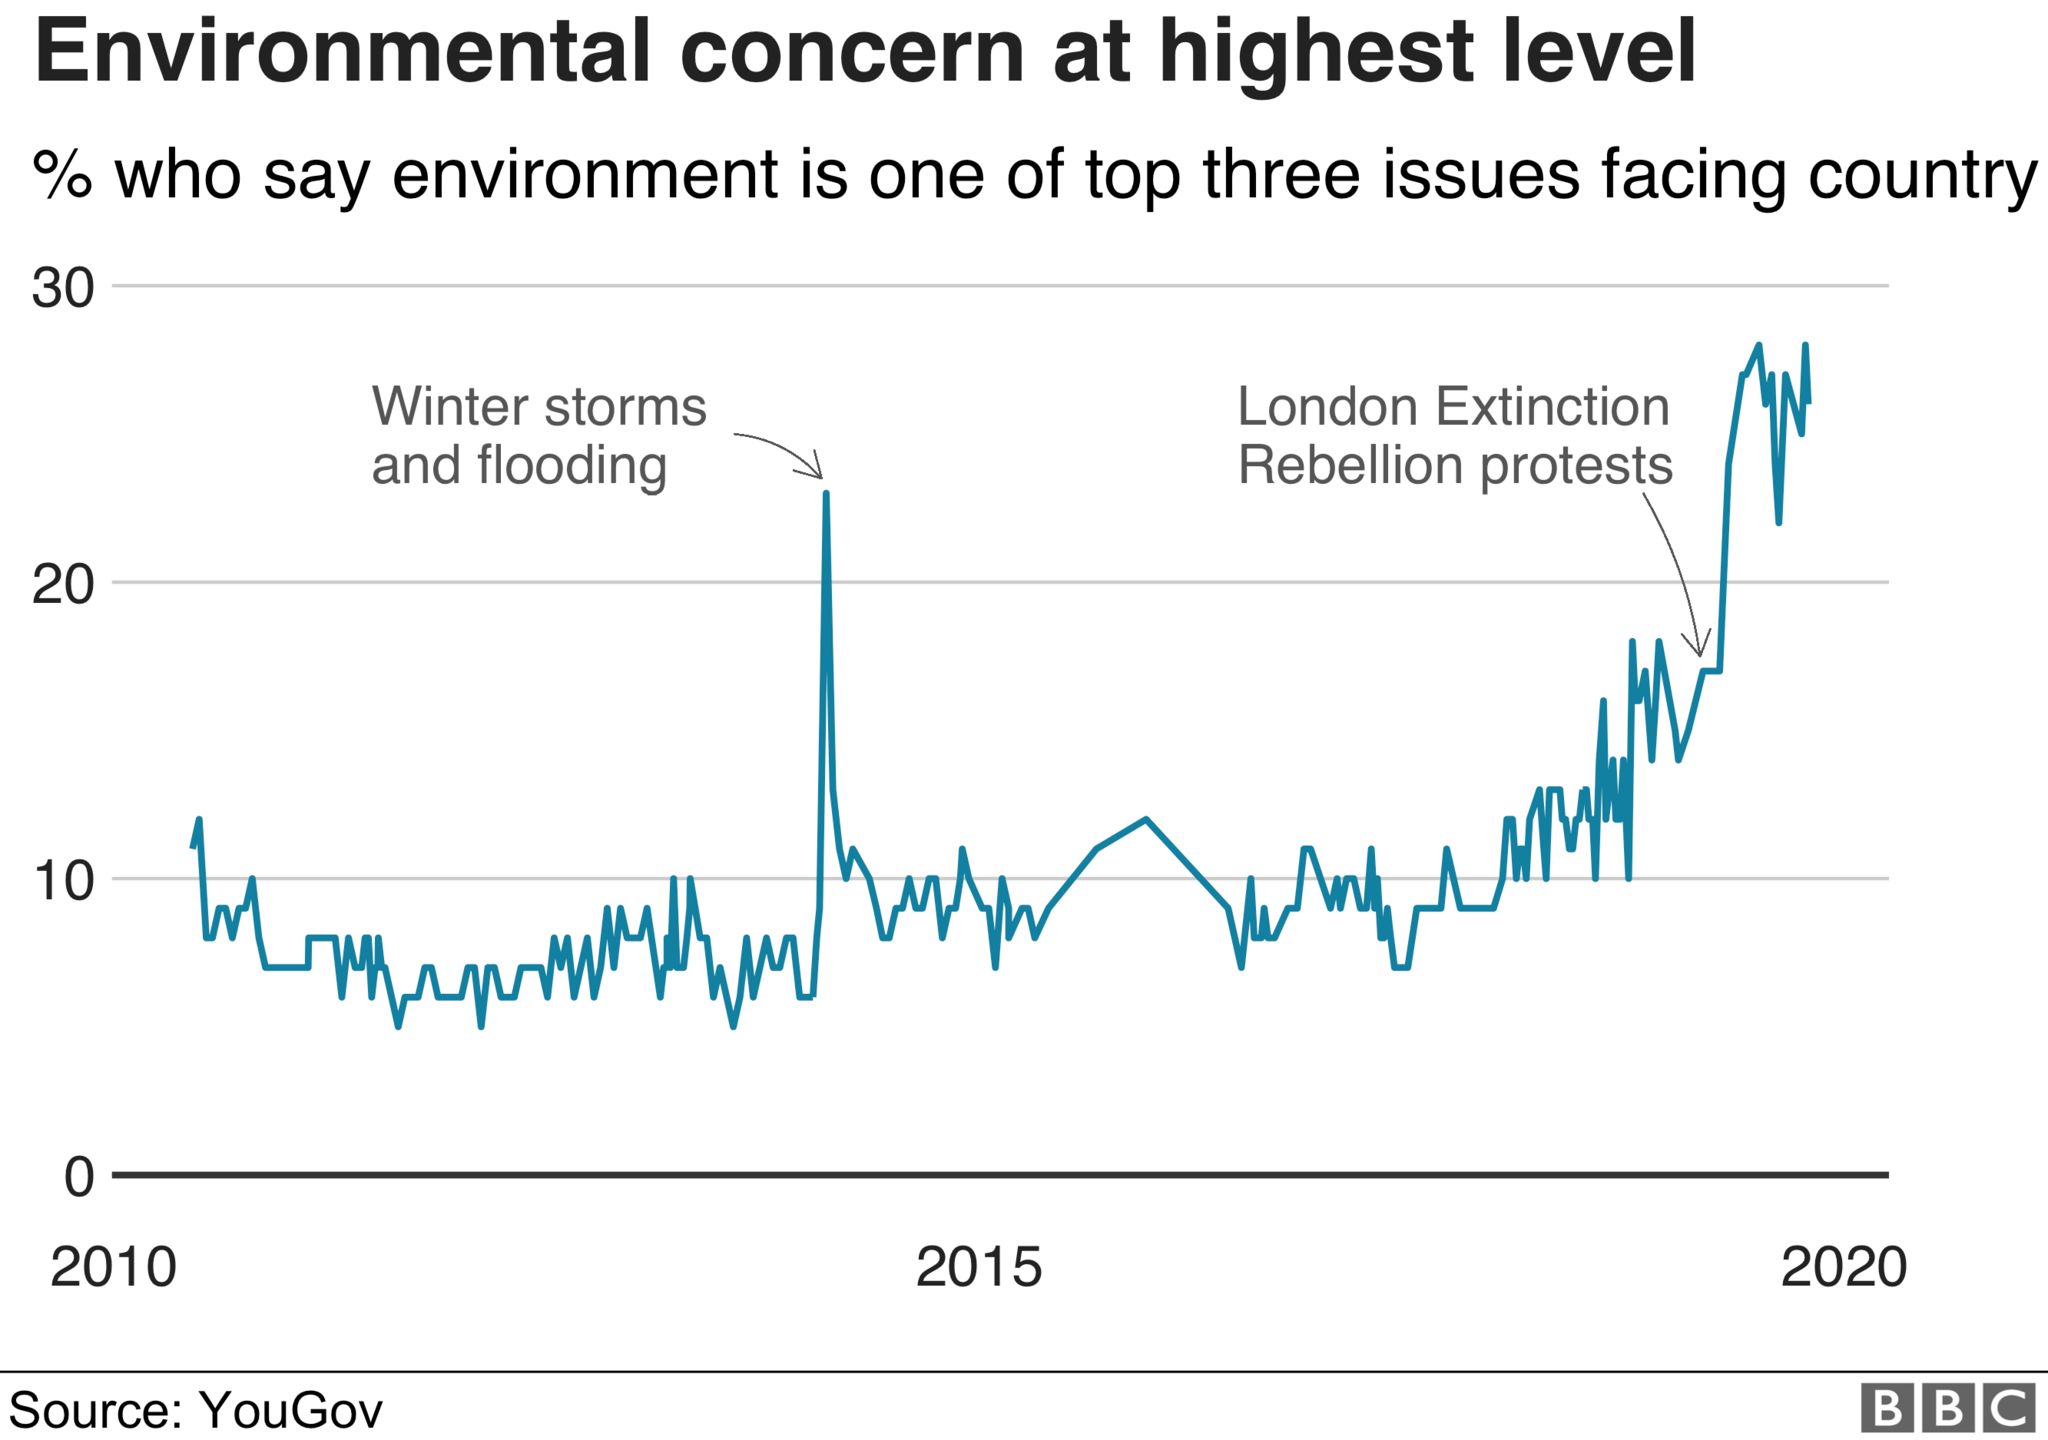 A graphic showing an increase in concern about the environment